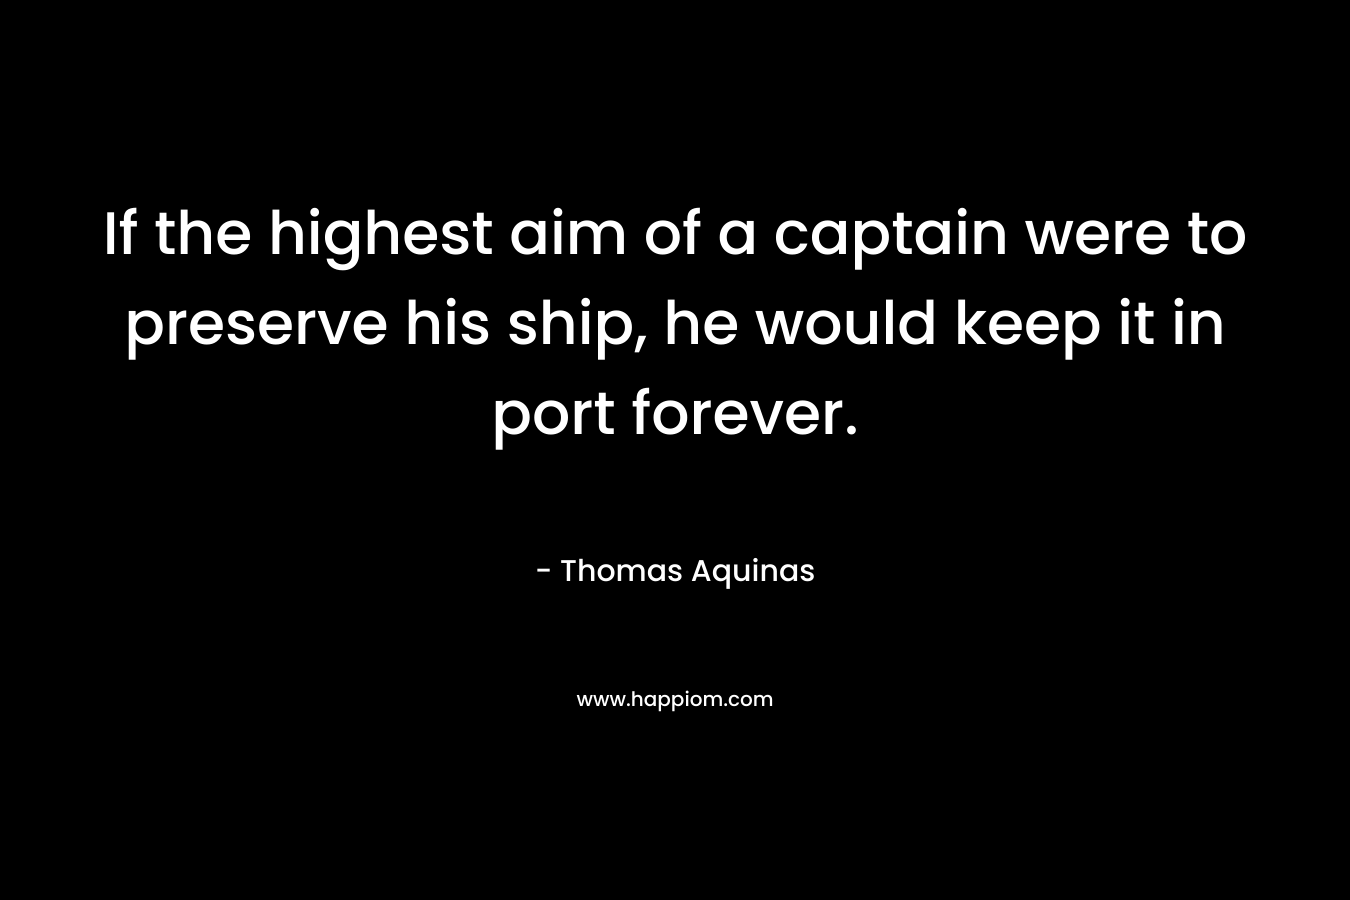 If the highest aim of a captain were to preserve his ship, he would keep it in port forever. – Thomas Aquinas